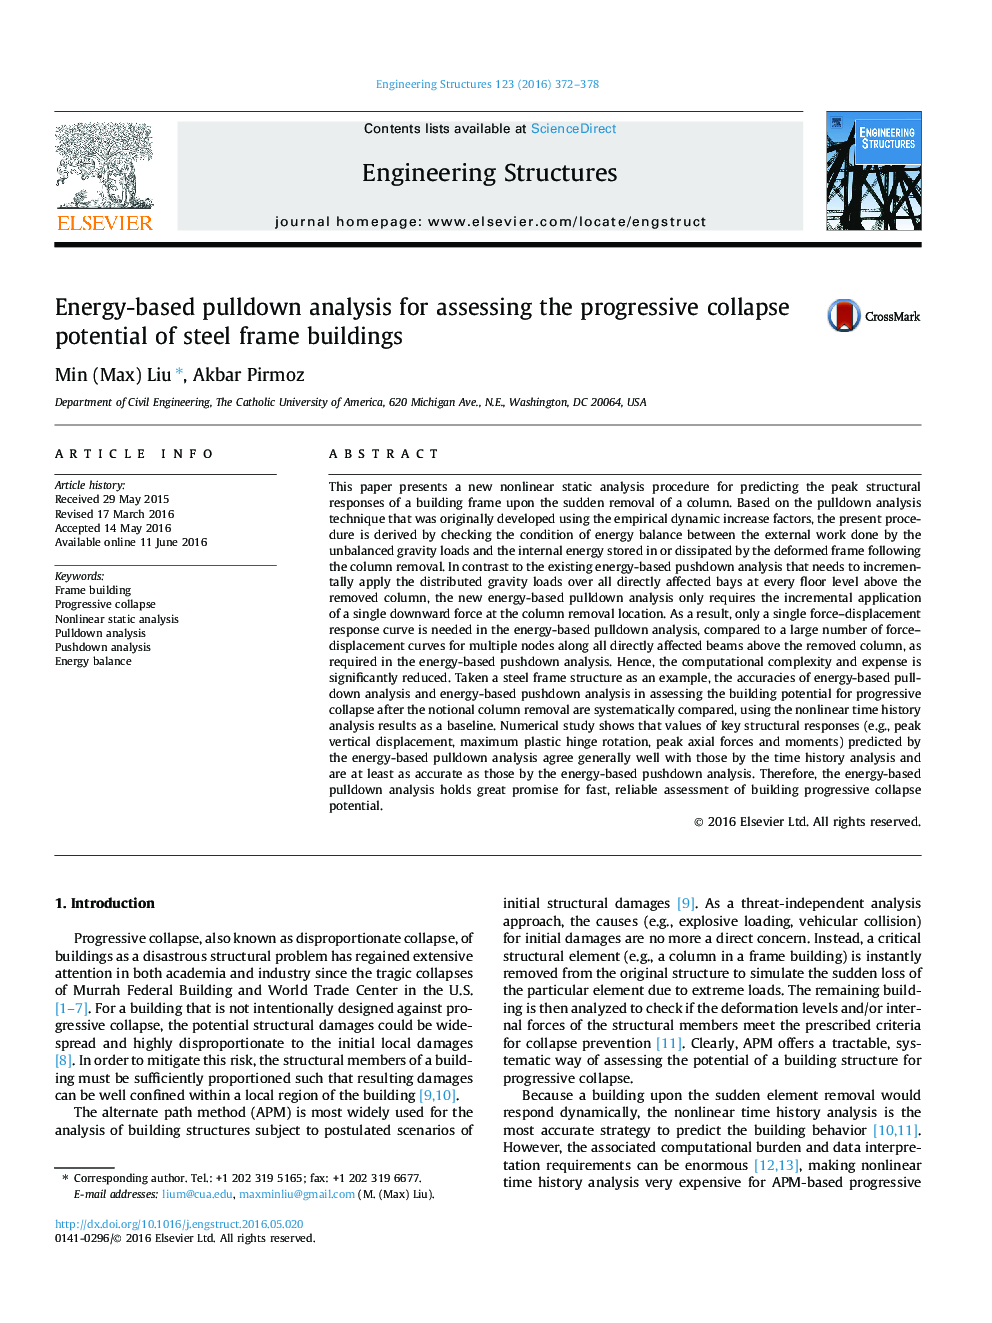 Energy-based pulldown analysis for assessing the progressive collapse potential of steel frame buildings